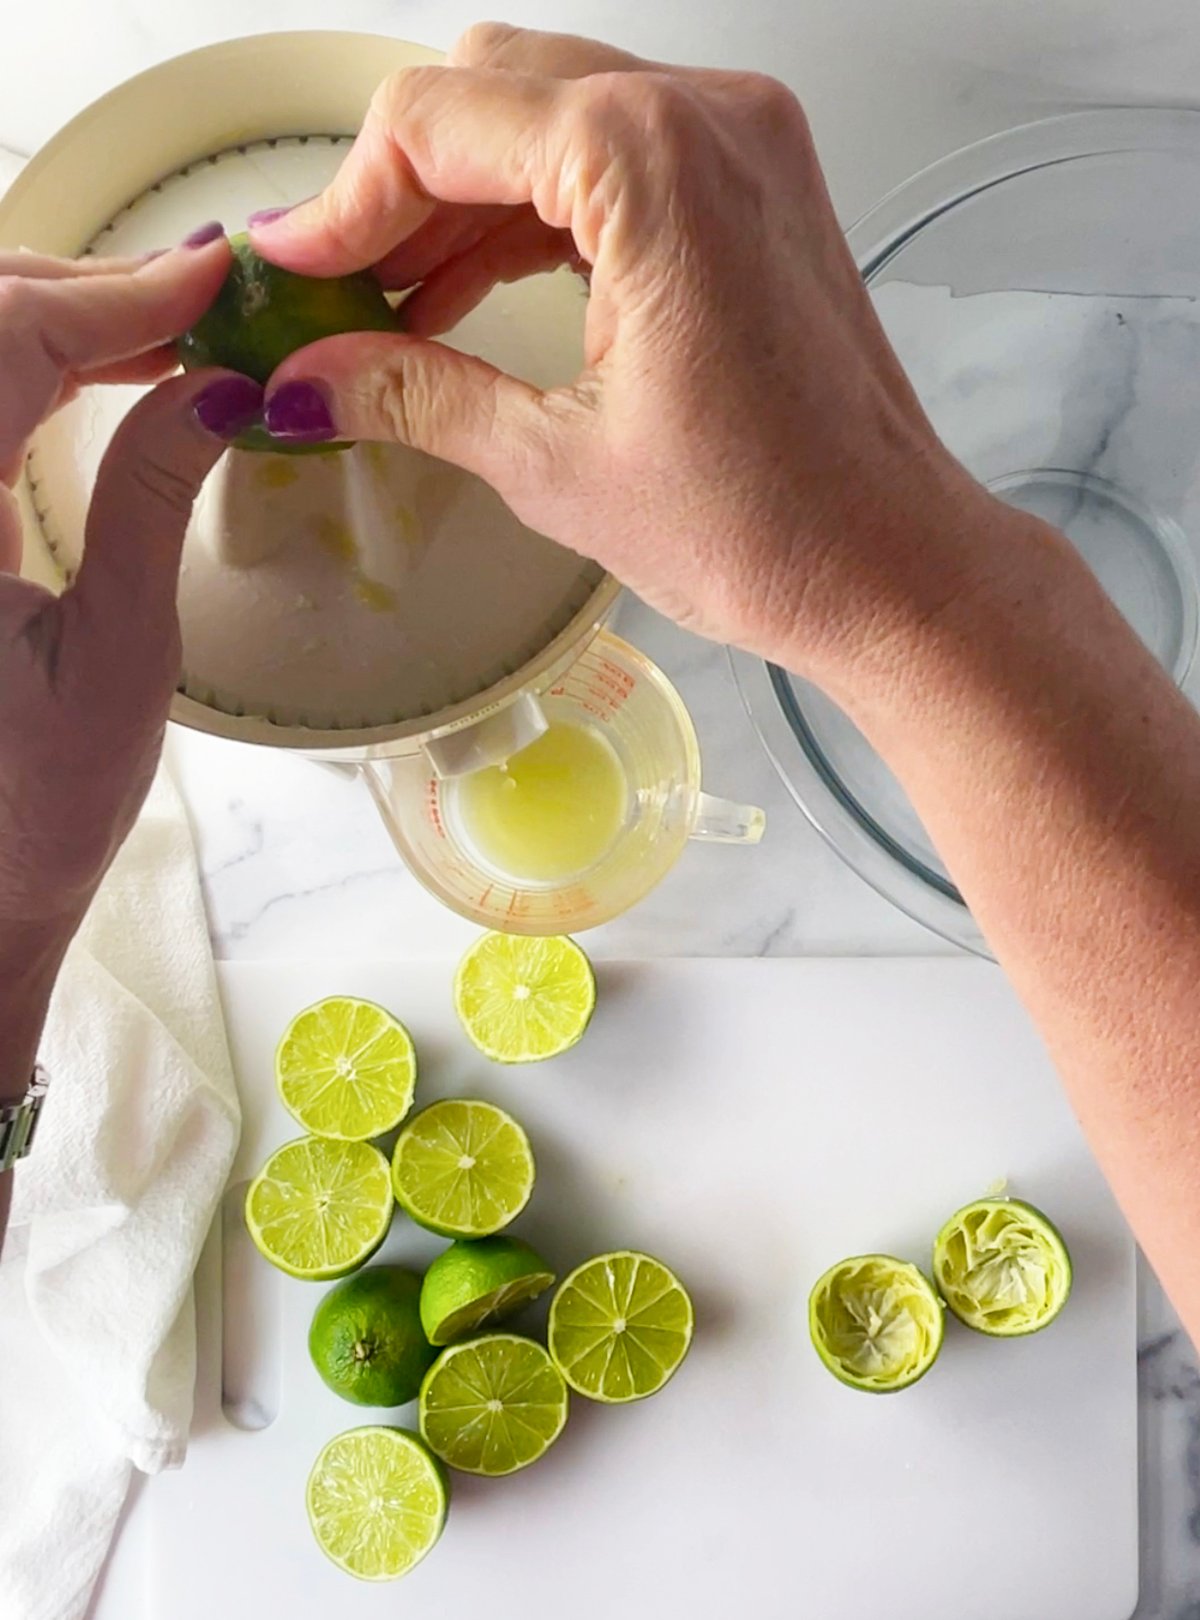 Juicing limes with and electric juicer.